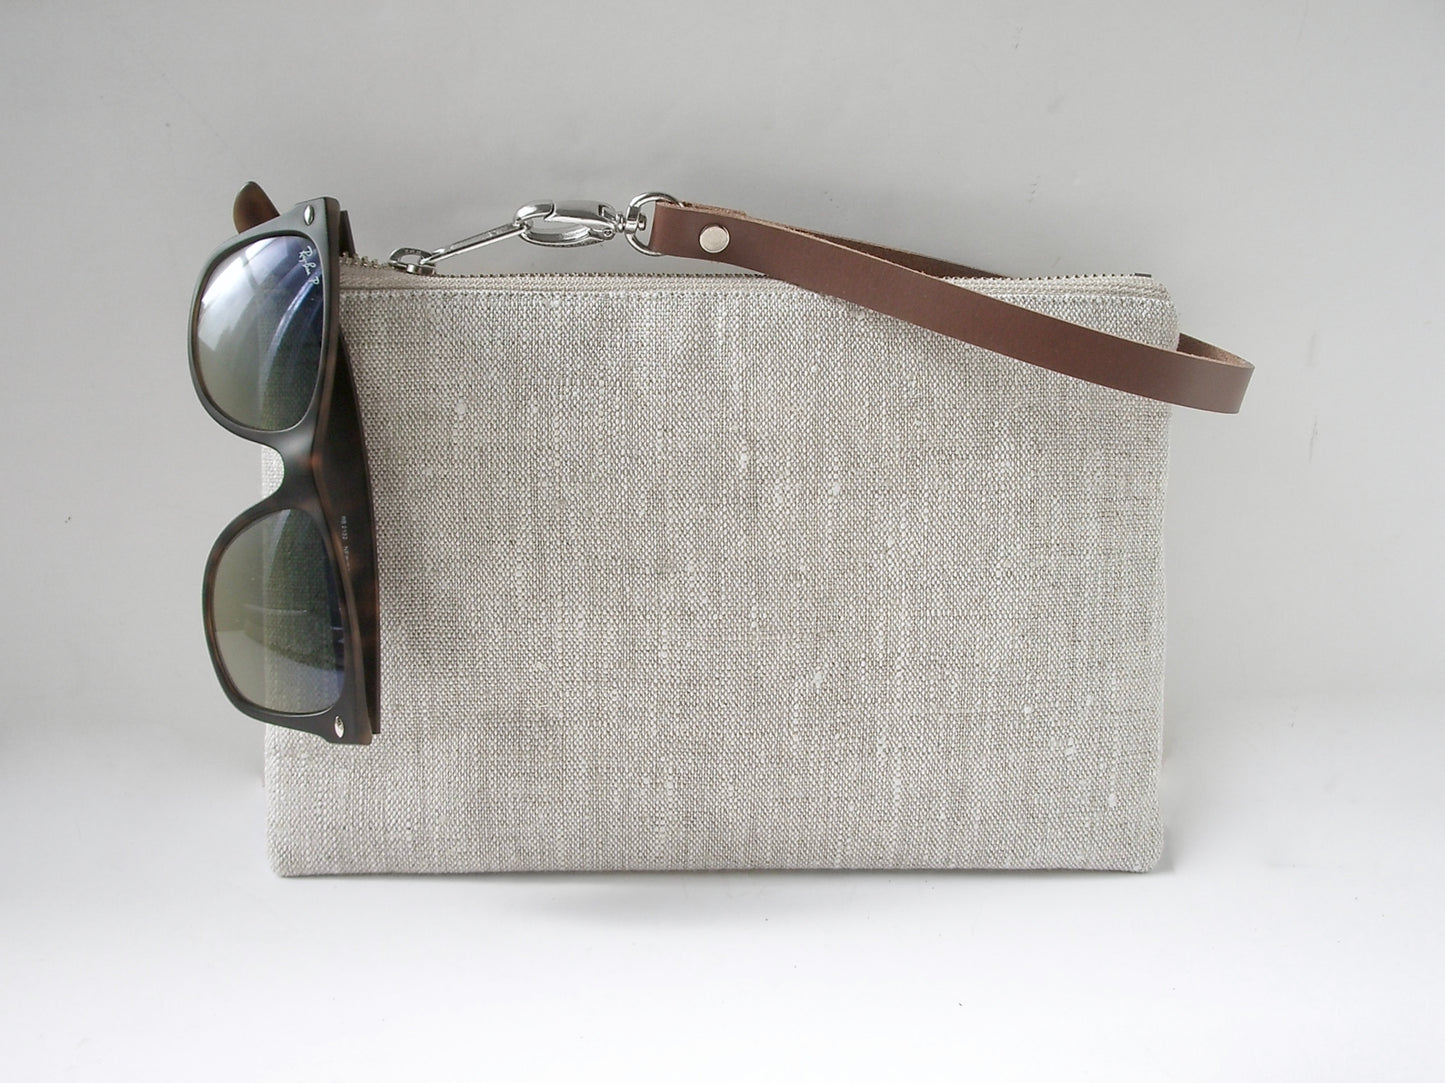 Clutch Bag in Natural Linen with Leather Wrist Strap